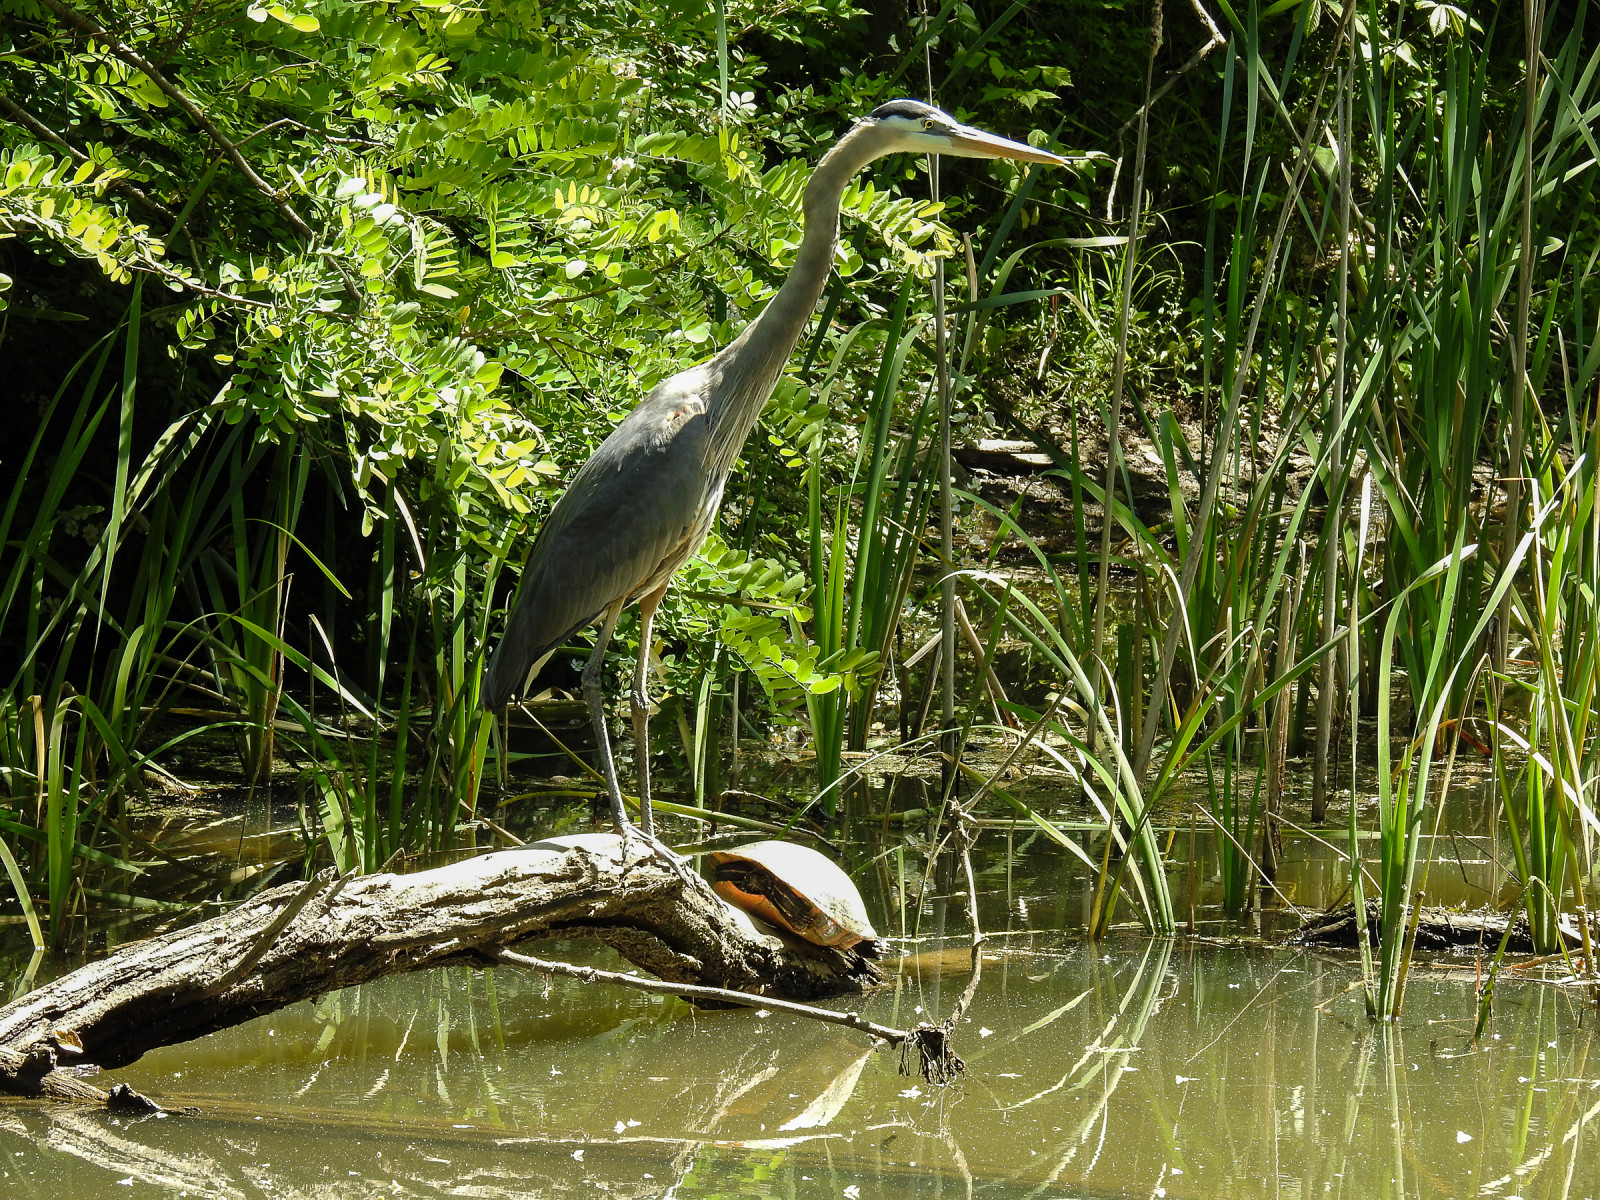 A tall, slender bird with a long beak sits on a branch extending from water in the sunlight, surrounded by grasses and greenery. Also on the branch, just out of the water, is a turtle, also enjoying the bright sun.